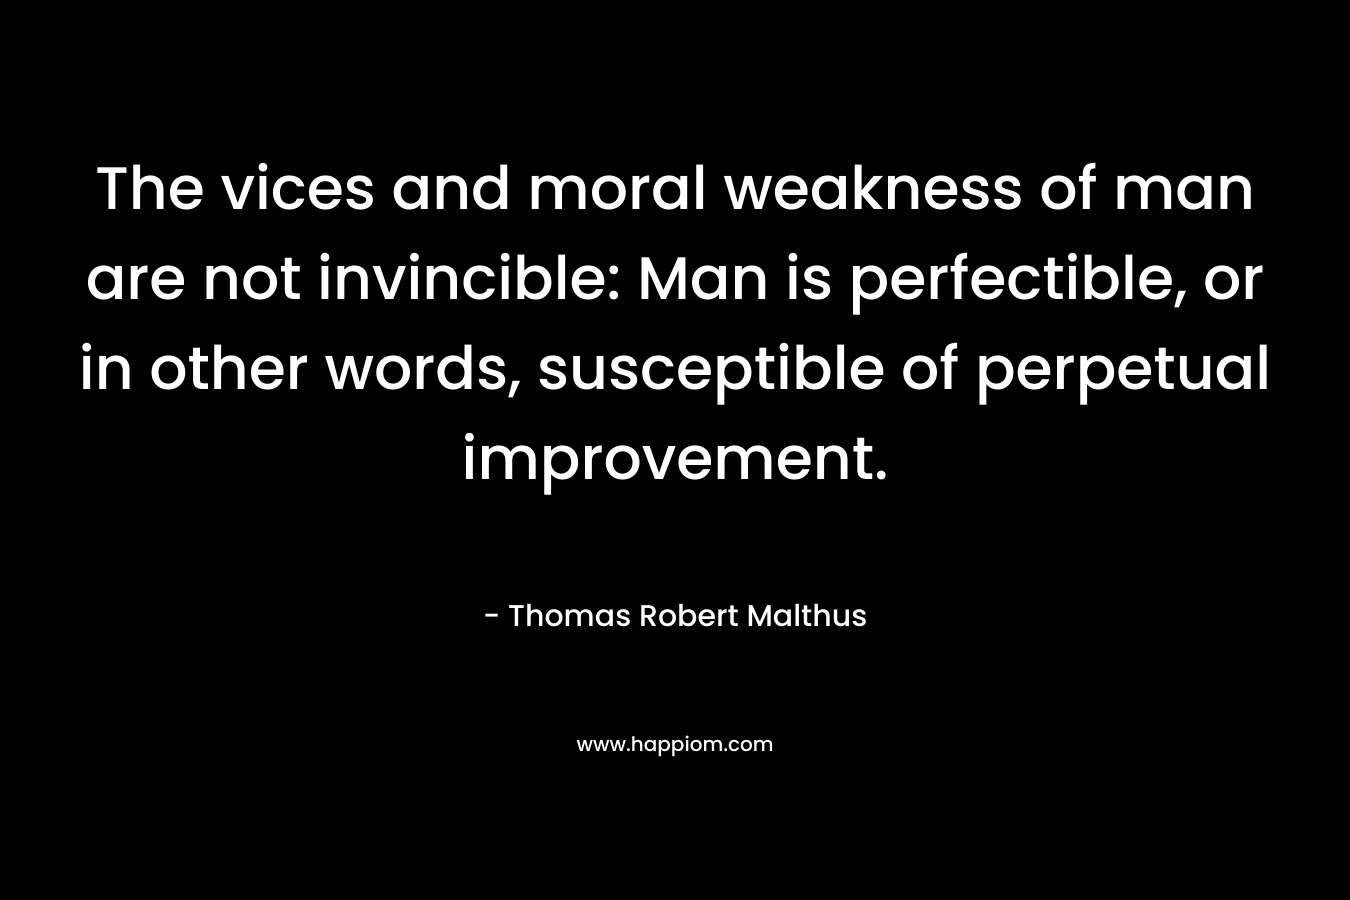 The vices and moral weakness of man are not invincible: Man is perfectible, or in other words, susceptible of perpetual improvement.